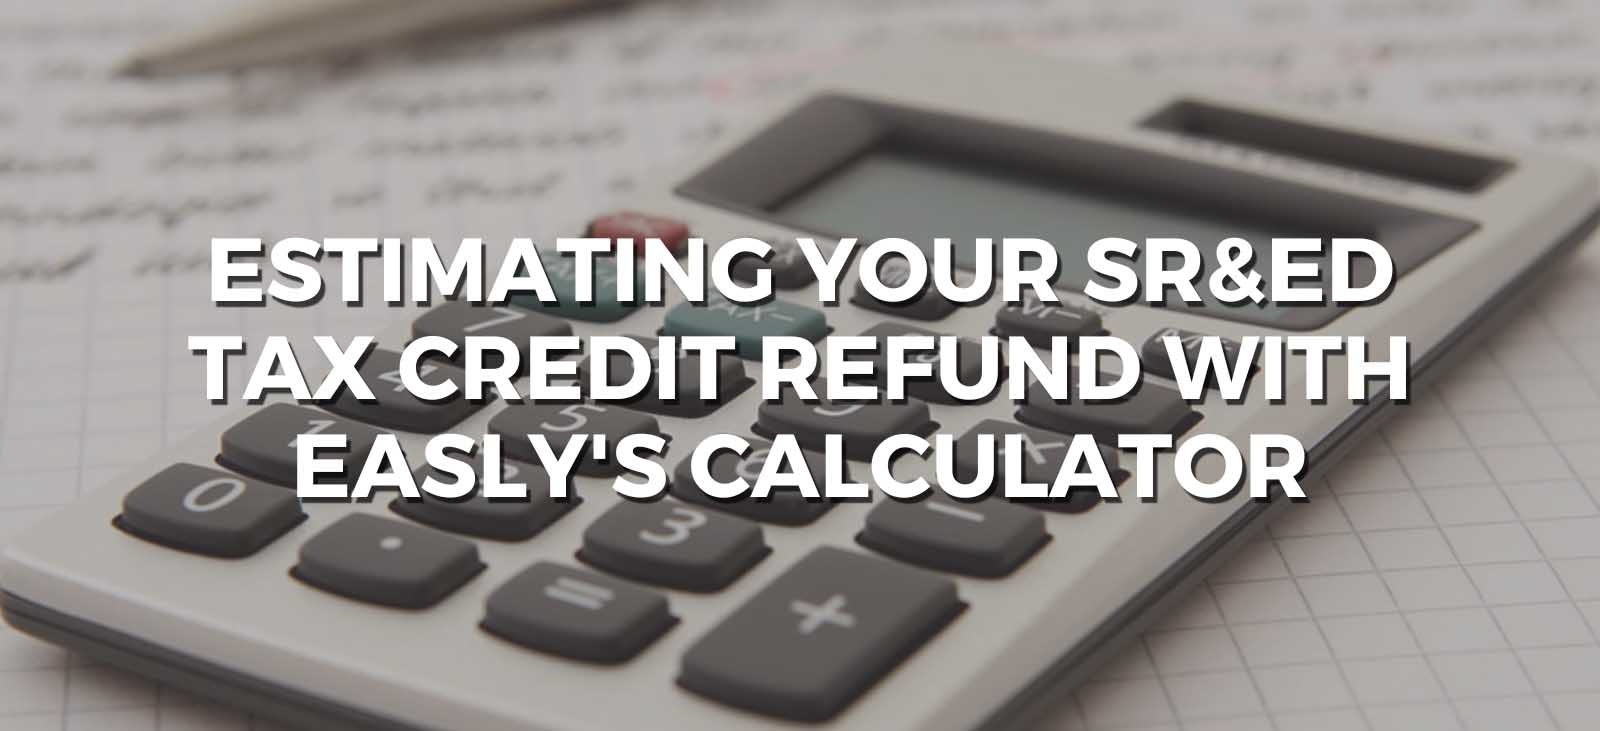 estimate your sr&ed tax credit refund with easly's calculator